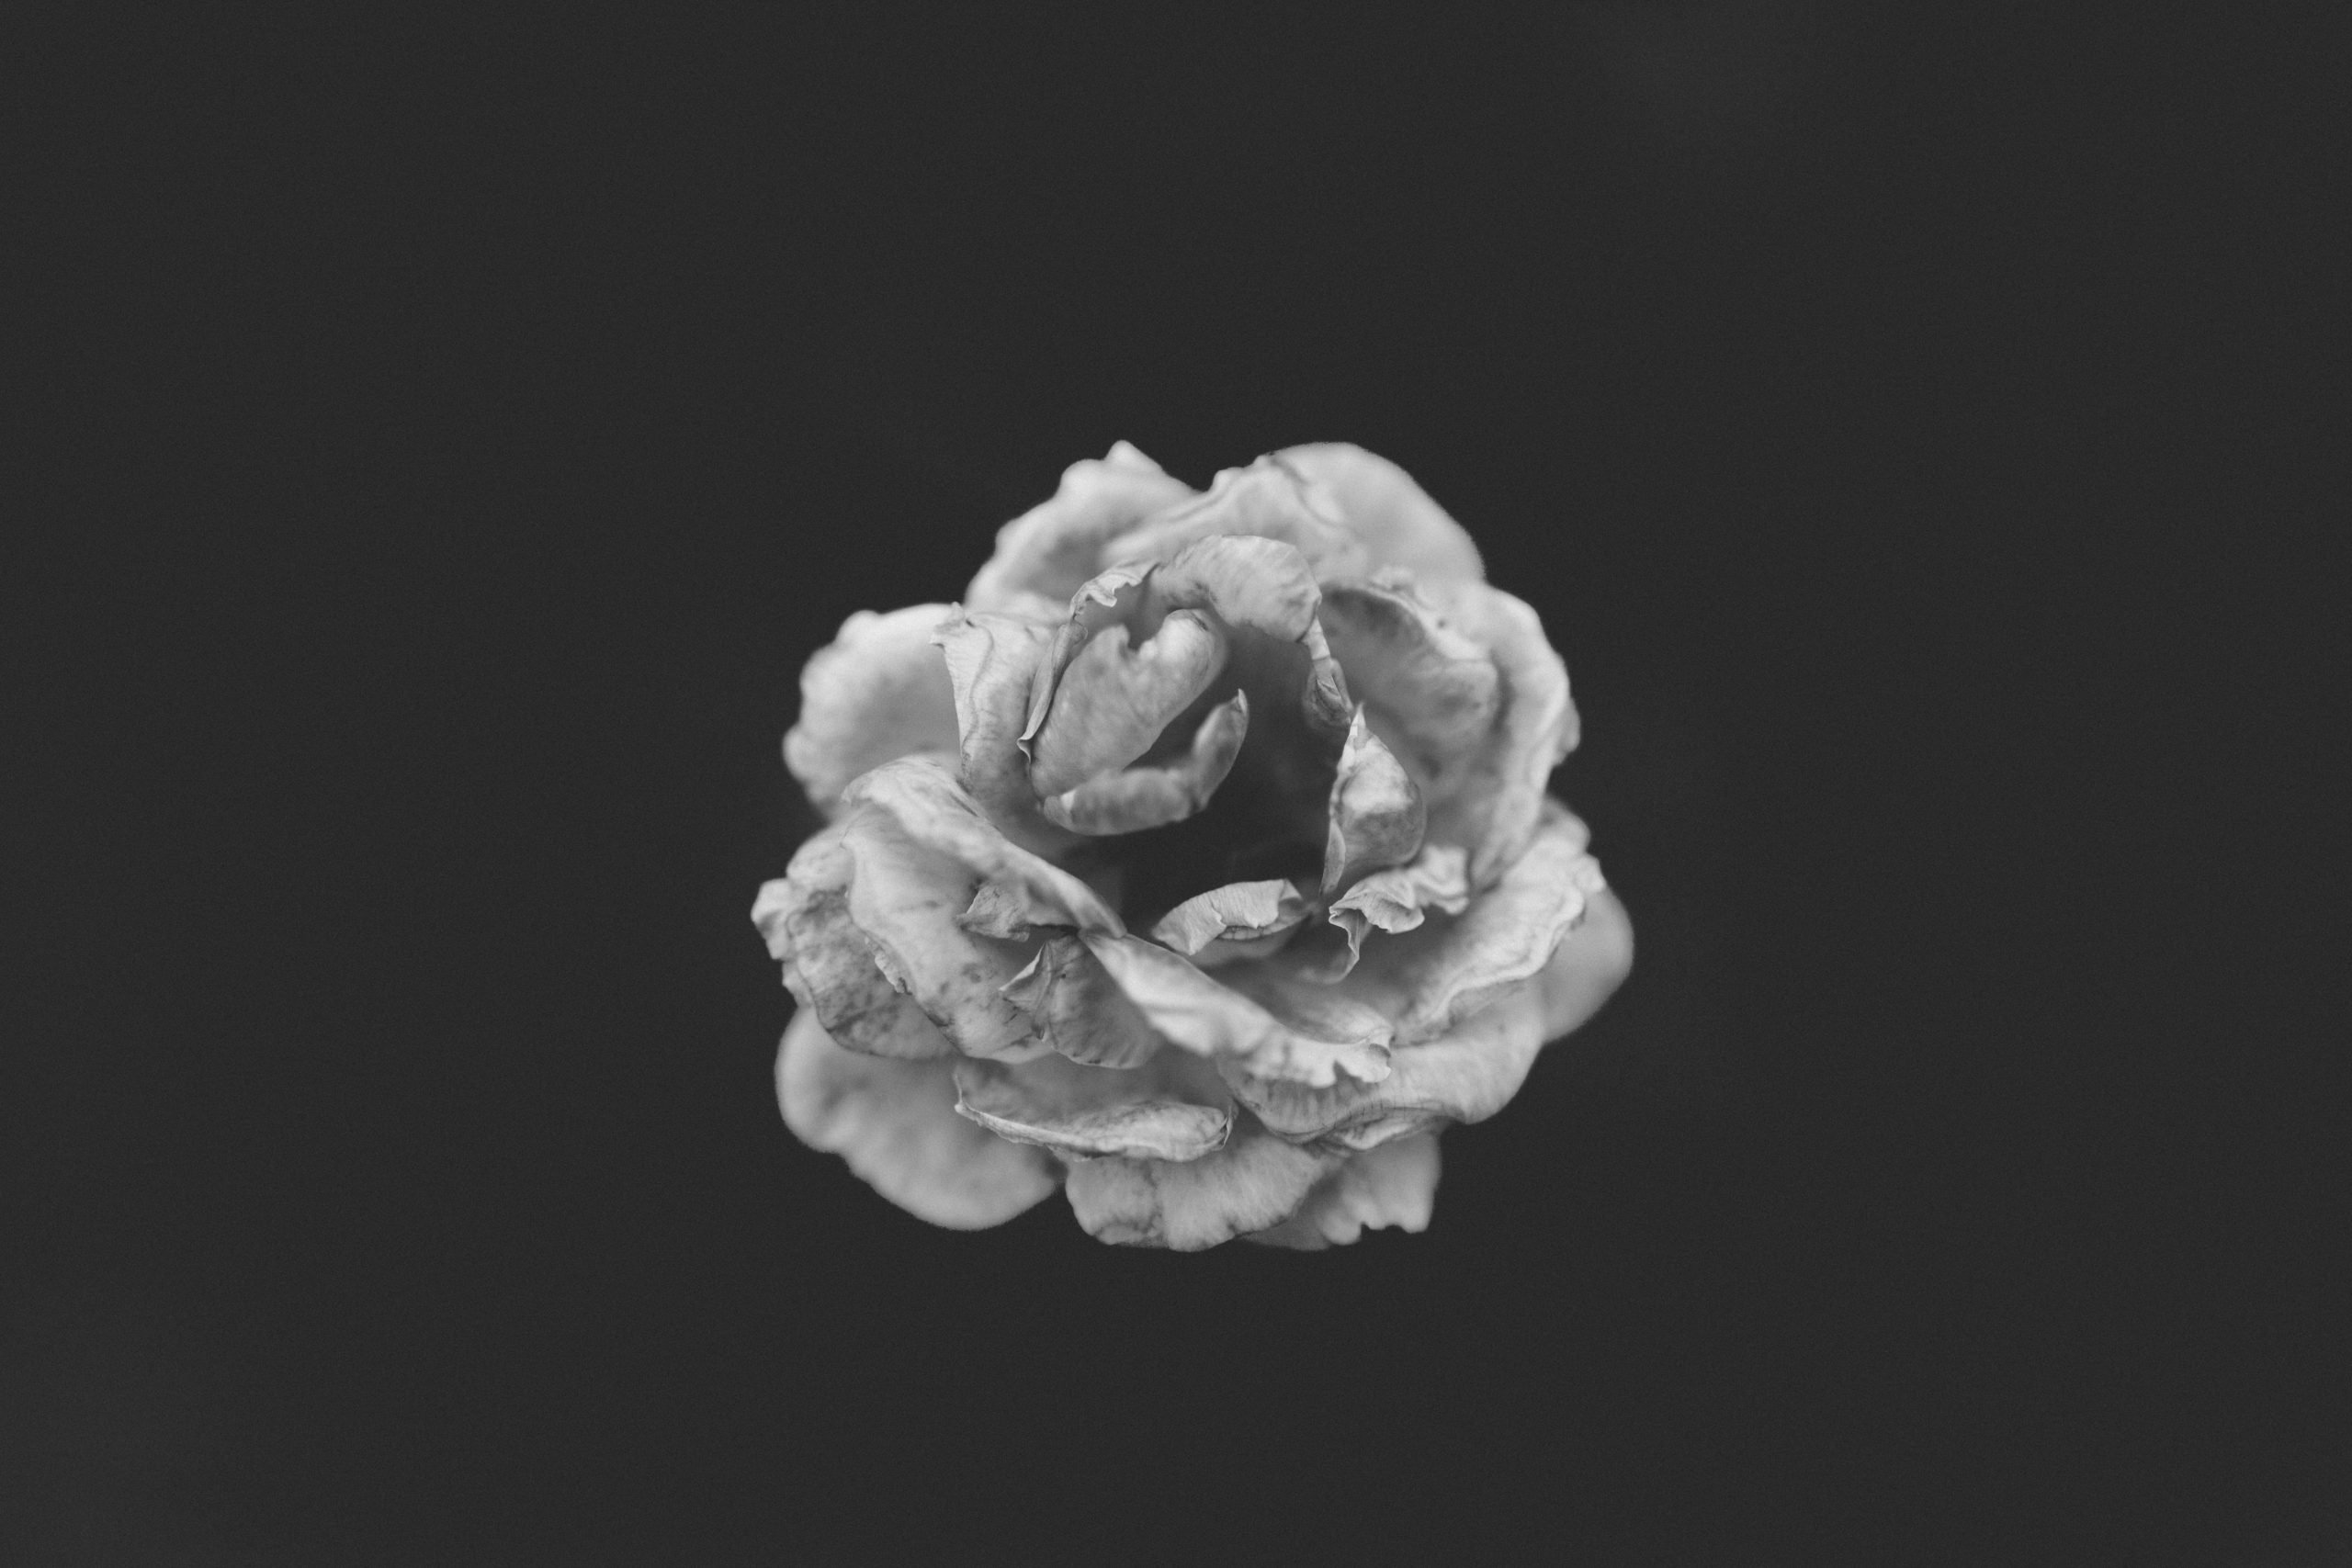 Grayscale photography of rose